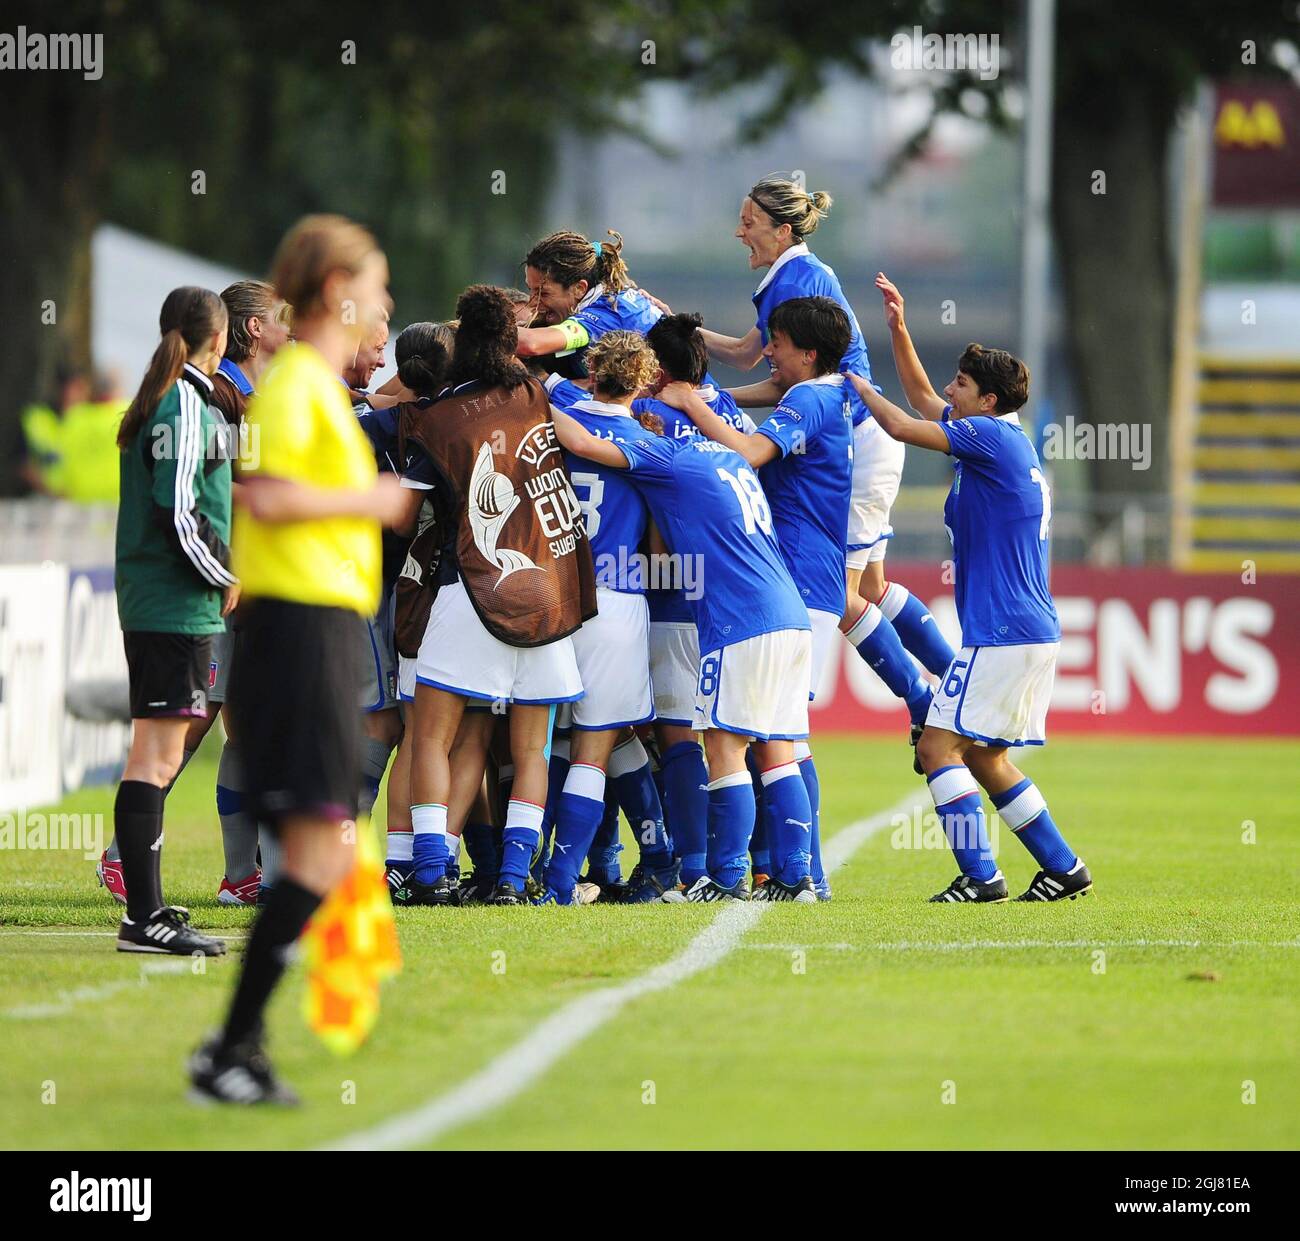 HALMSTAD 2013-07-13 Italian players celebrate after Melania Gabbiadini (not seen) scored the team's first goal during the UEFA Women's EURO 2013 group A soccer match between Denmark and Italy at Orjans vall in Halmstad, Sweden, on July 13, 2013. Photo: Bjorn Lindgren / SCANPIX / code 9204  Stock Photo